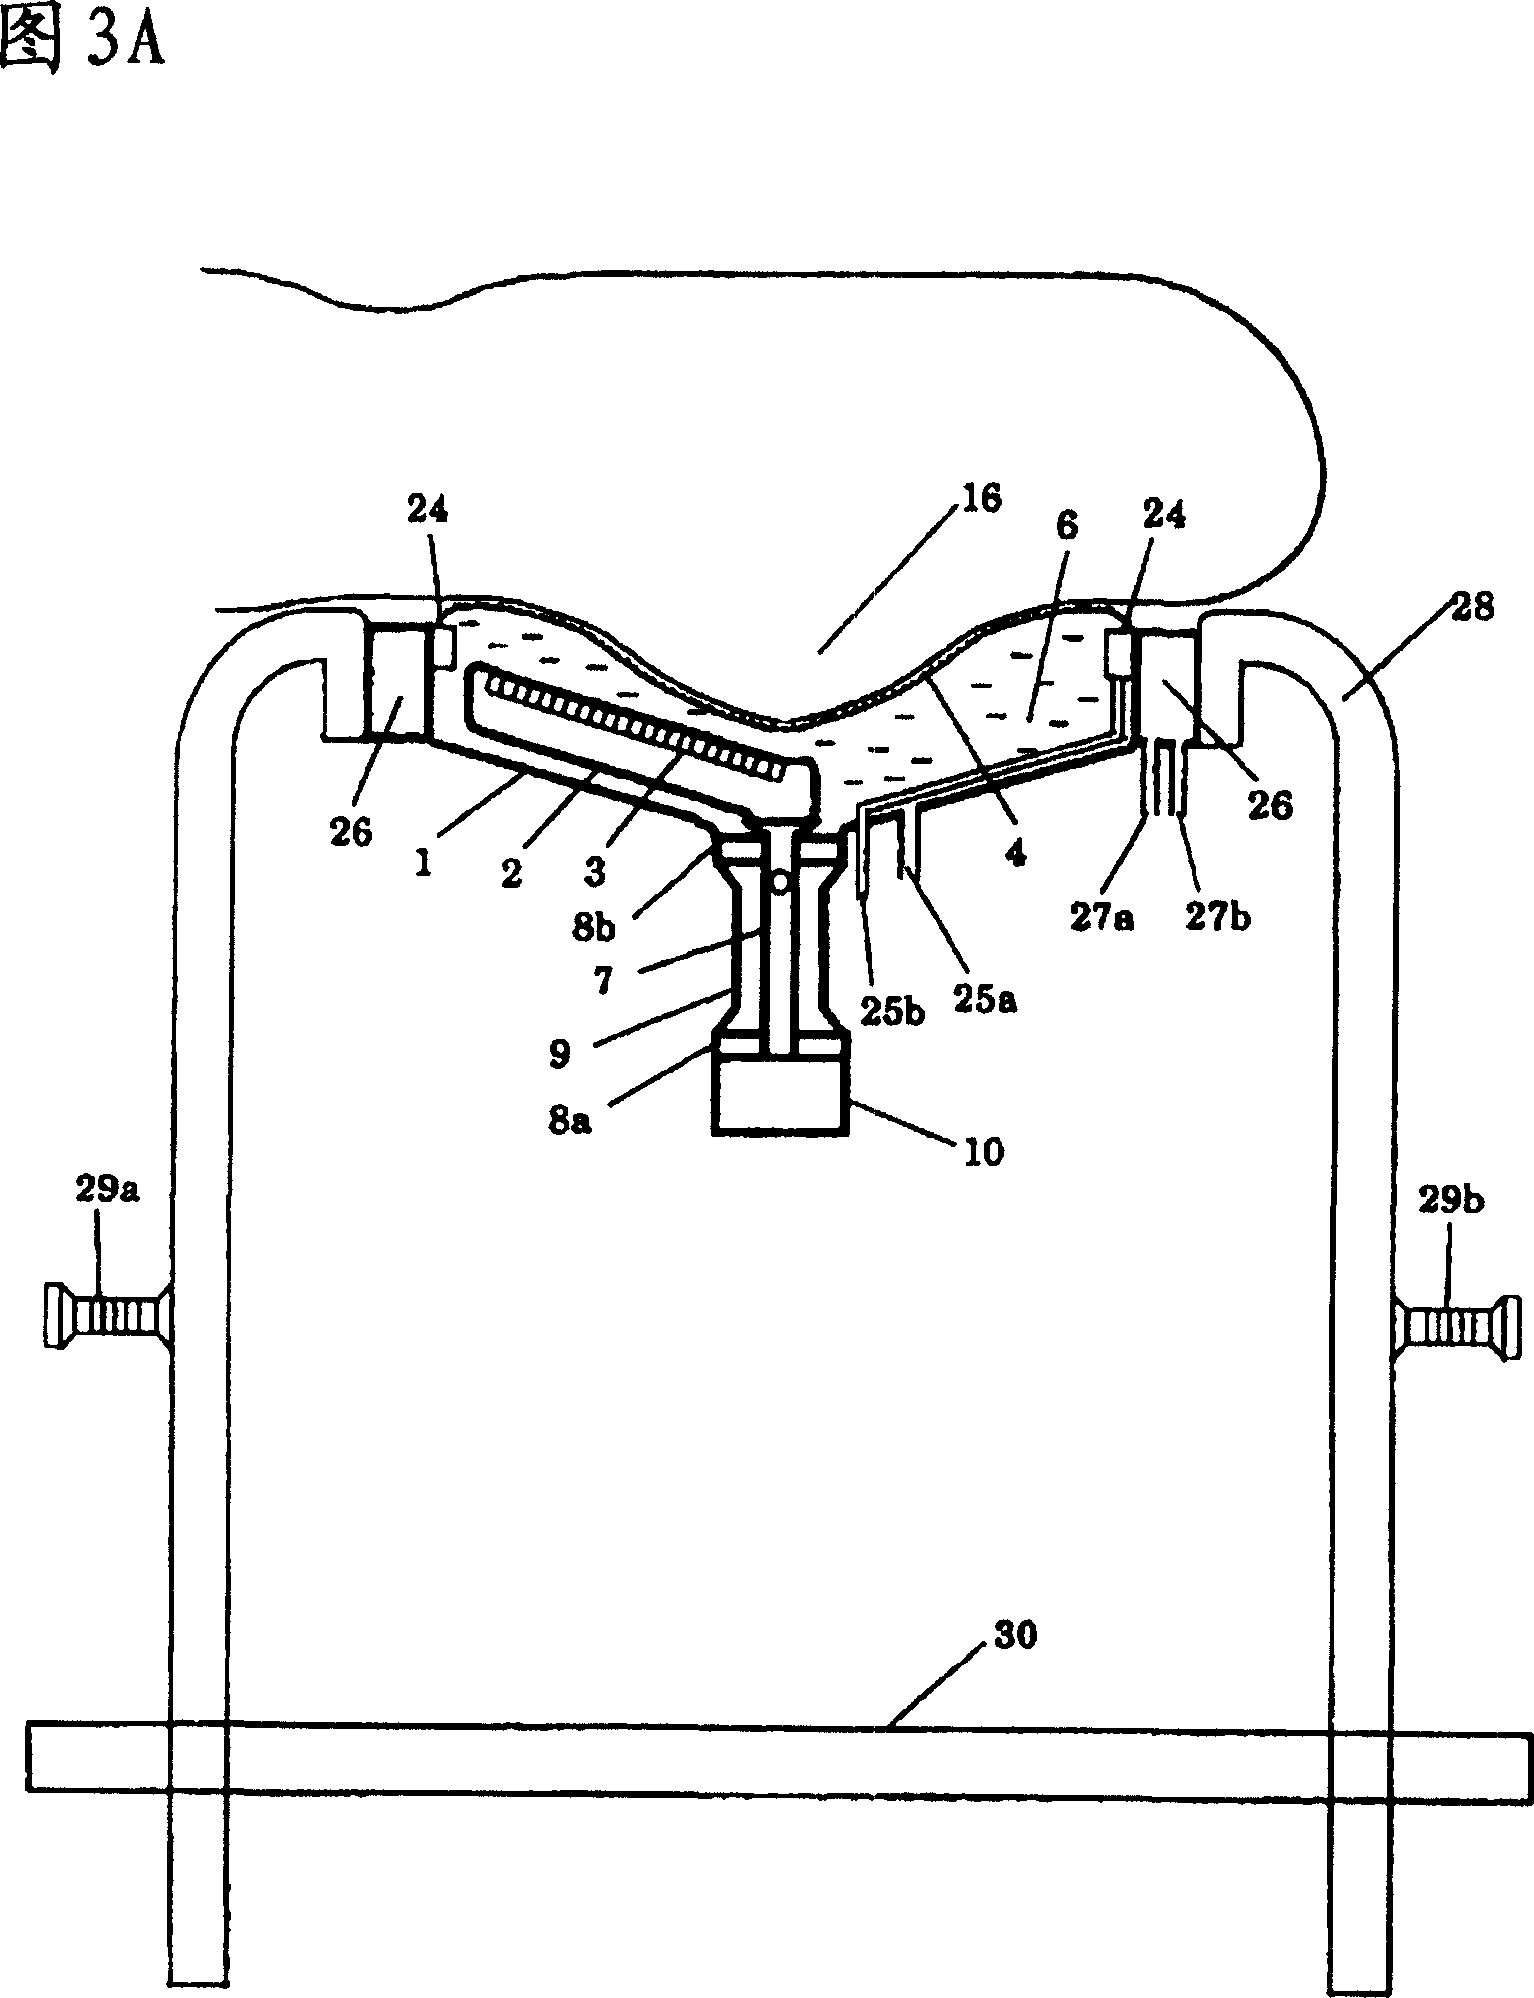 Supersonic wave checking device